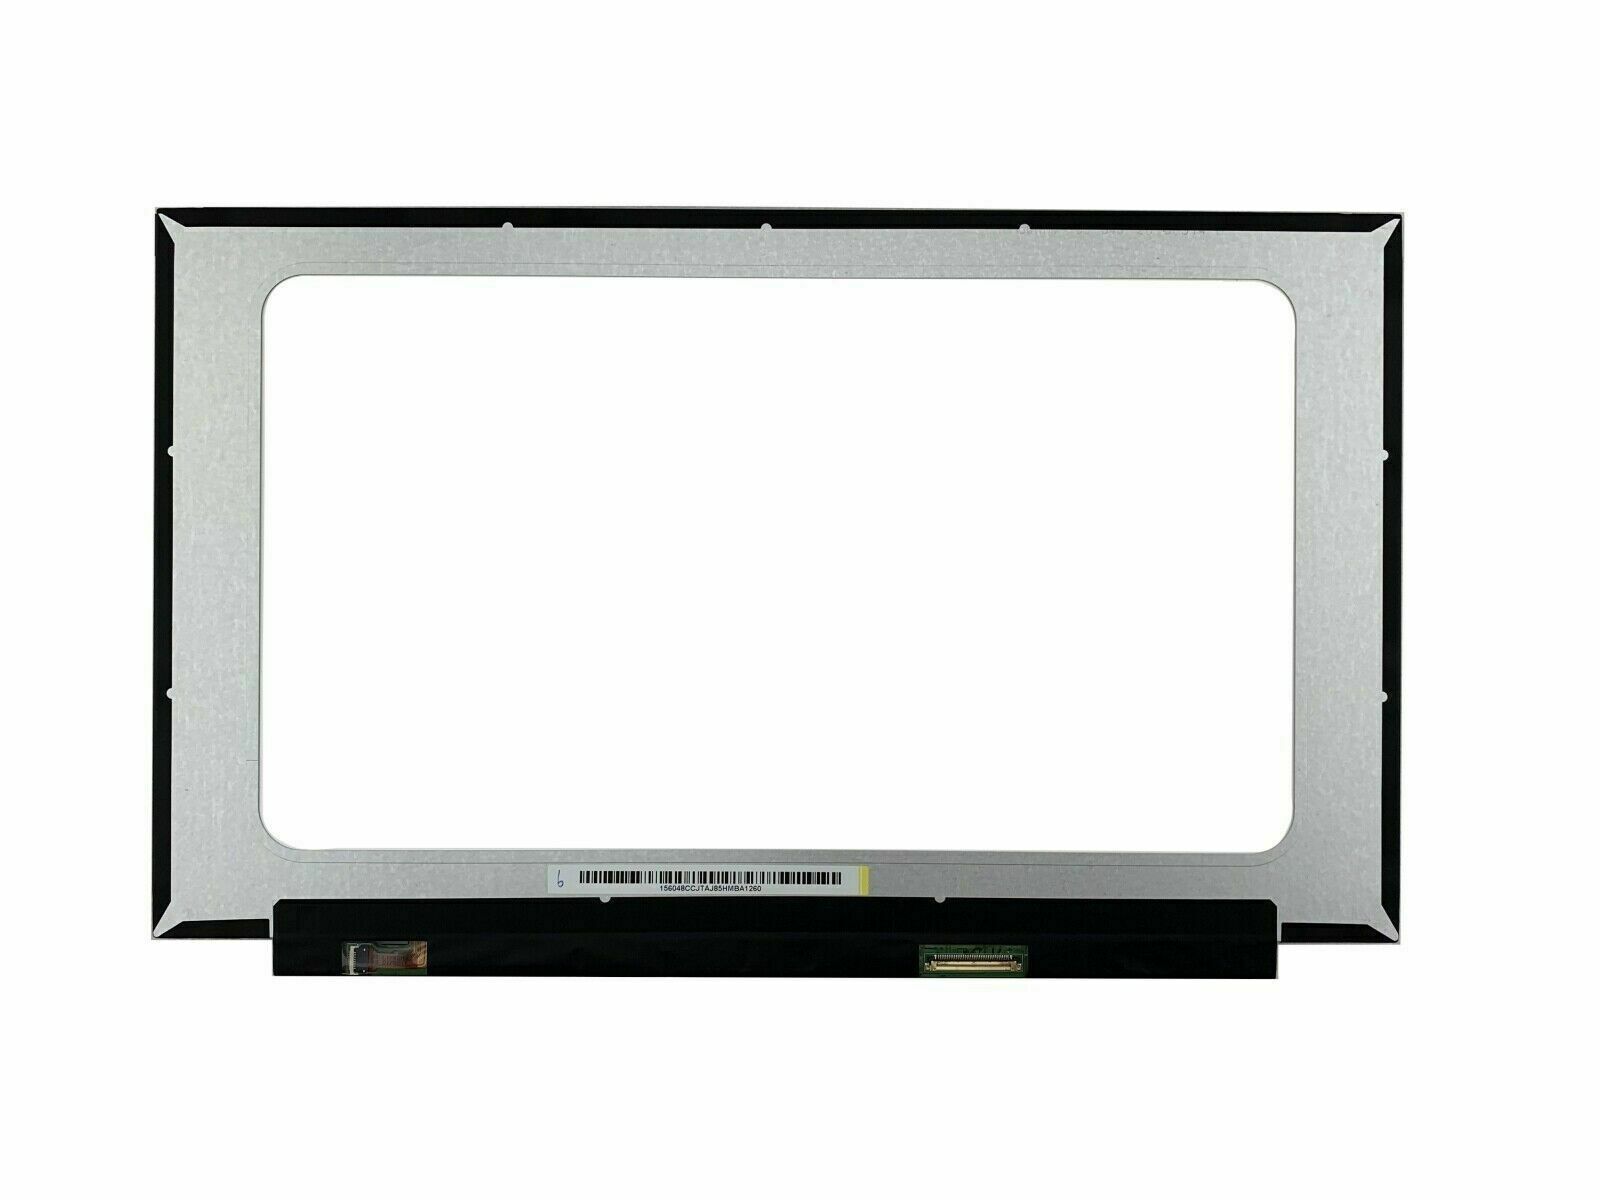 Primary image for 15.6" Fhd Lcd Touch Screen Hp Pavilion 15-eg3045cl 15-eg3053cl 15-eg3055cl